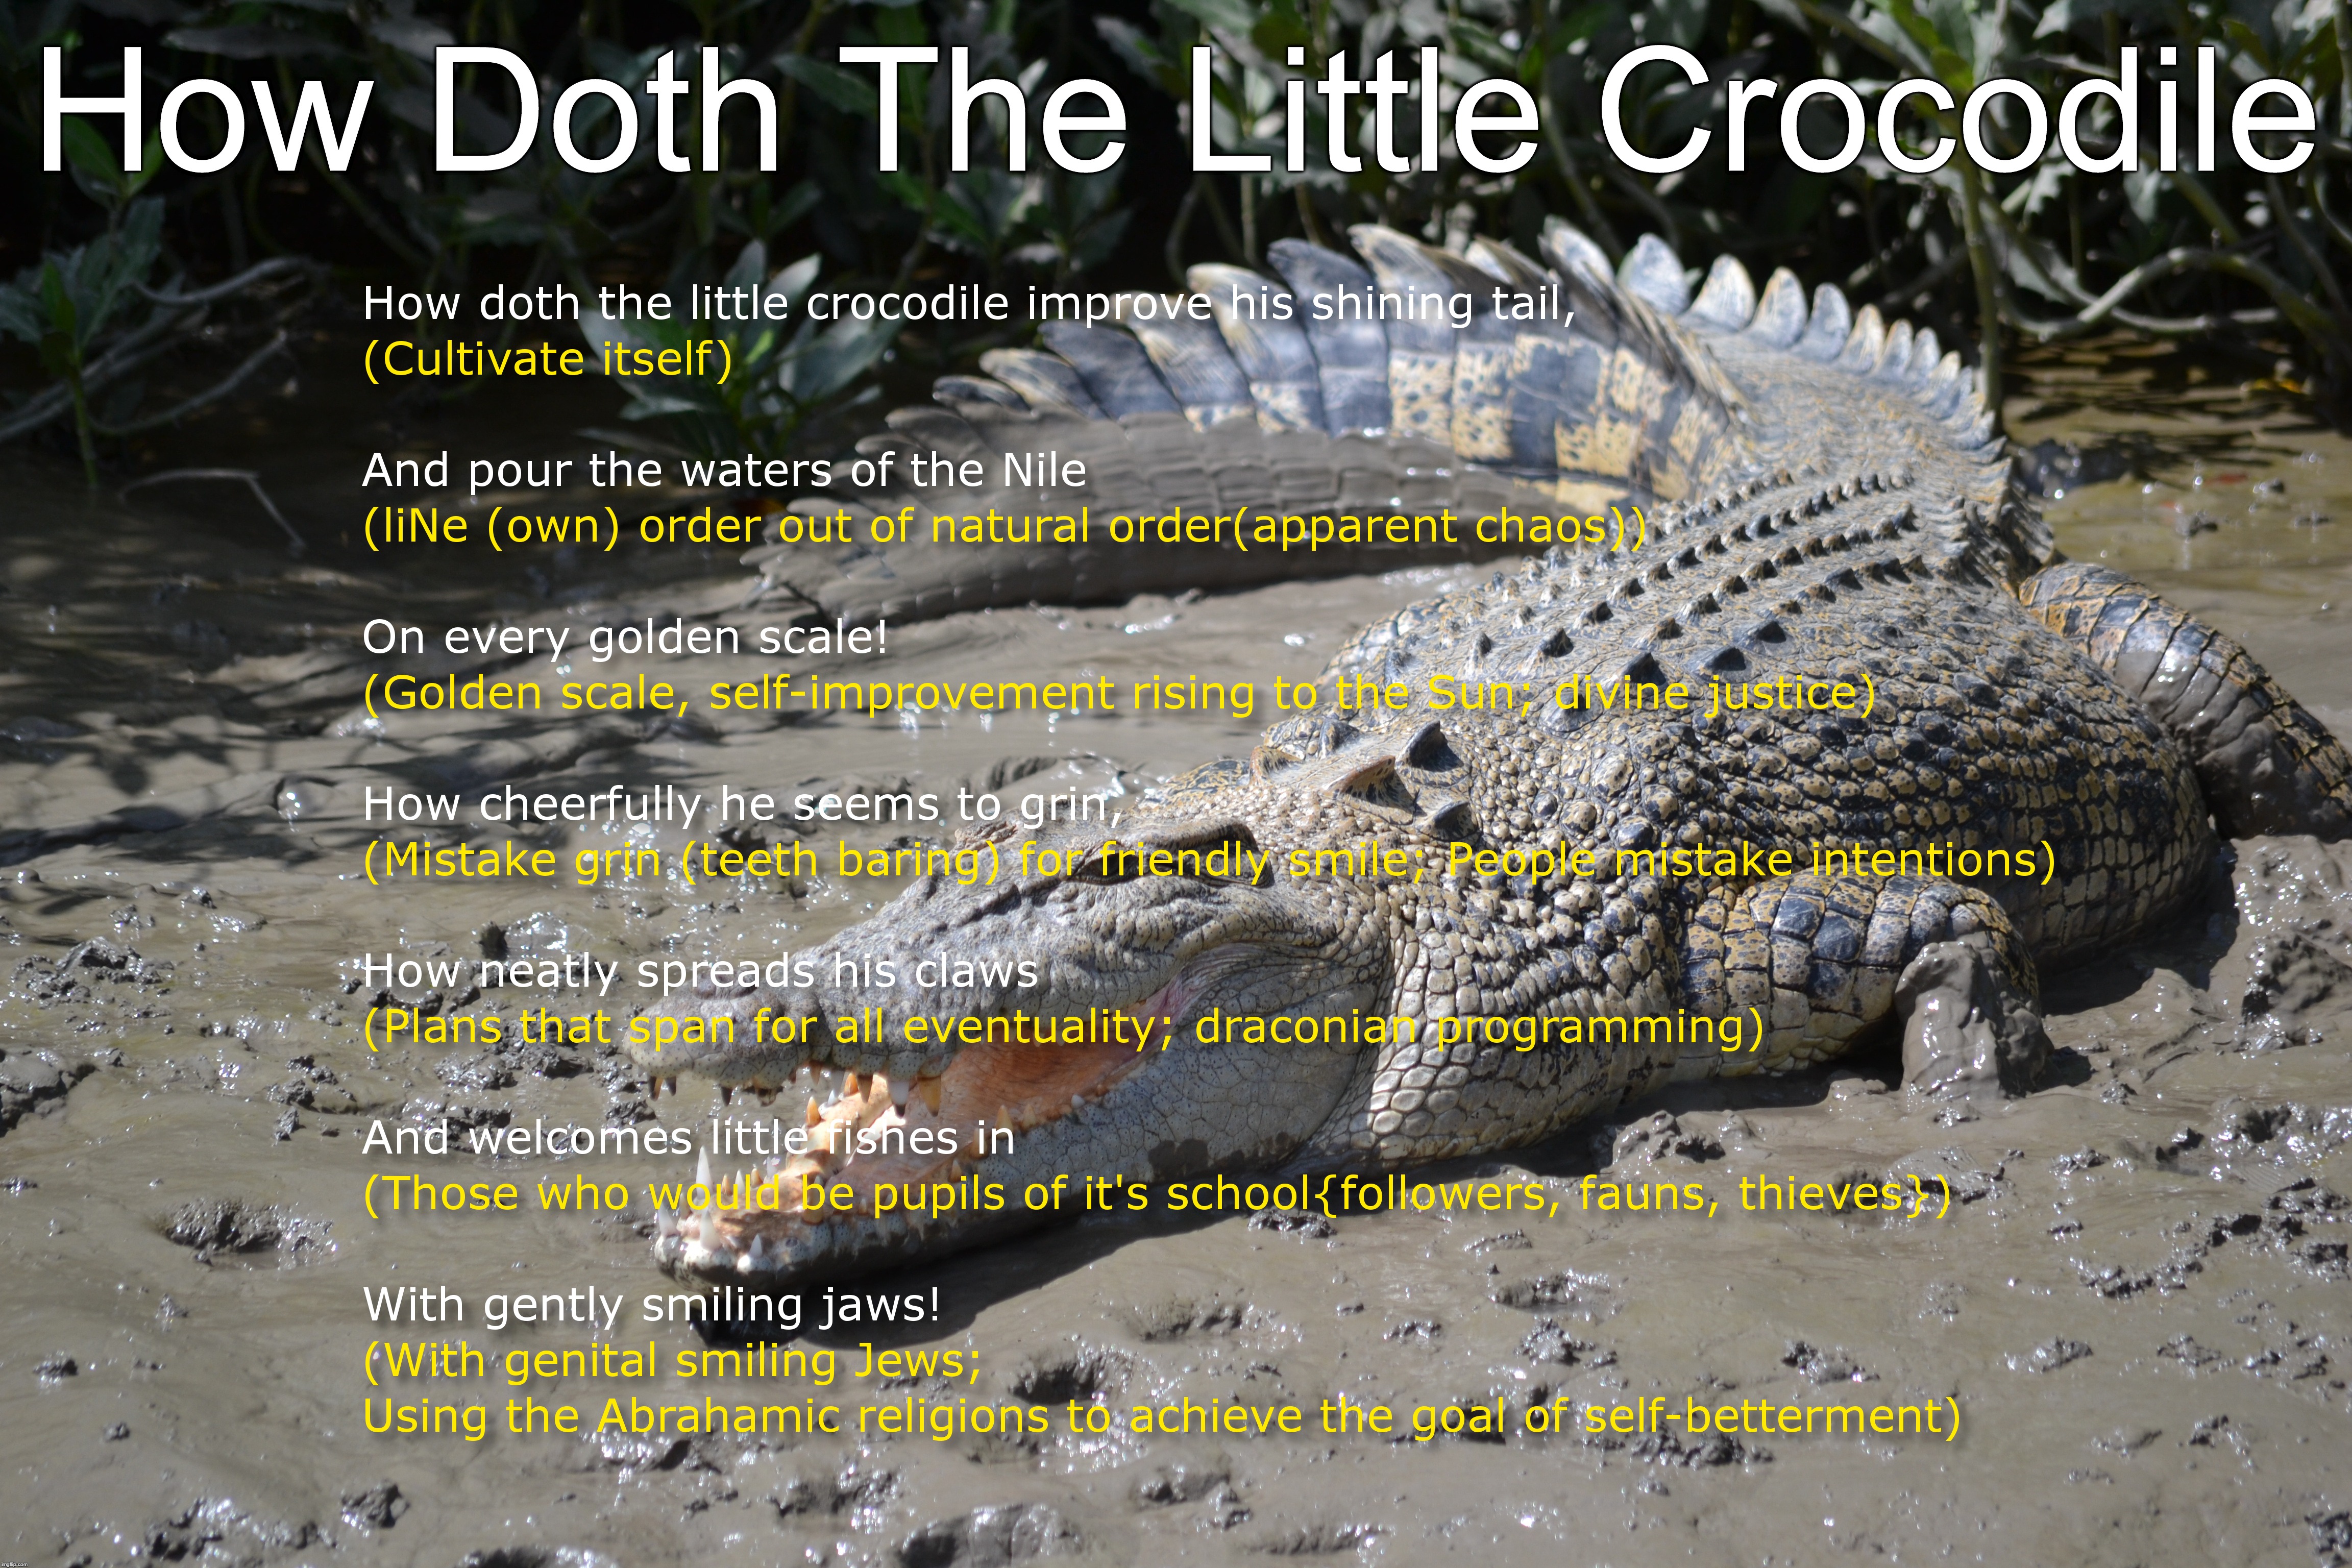 How Doth The Little Crocodile (adapted) | How Doth The Little Crocodile | image tagged in how,doth,little,crocodile,lewis,carroll | made w/ Imgflip meme maker